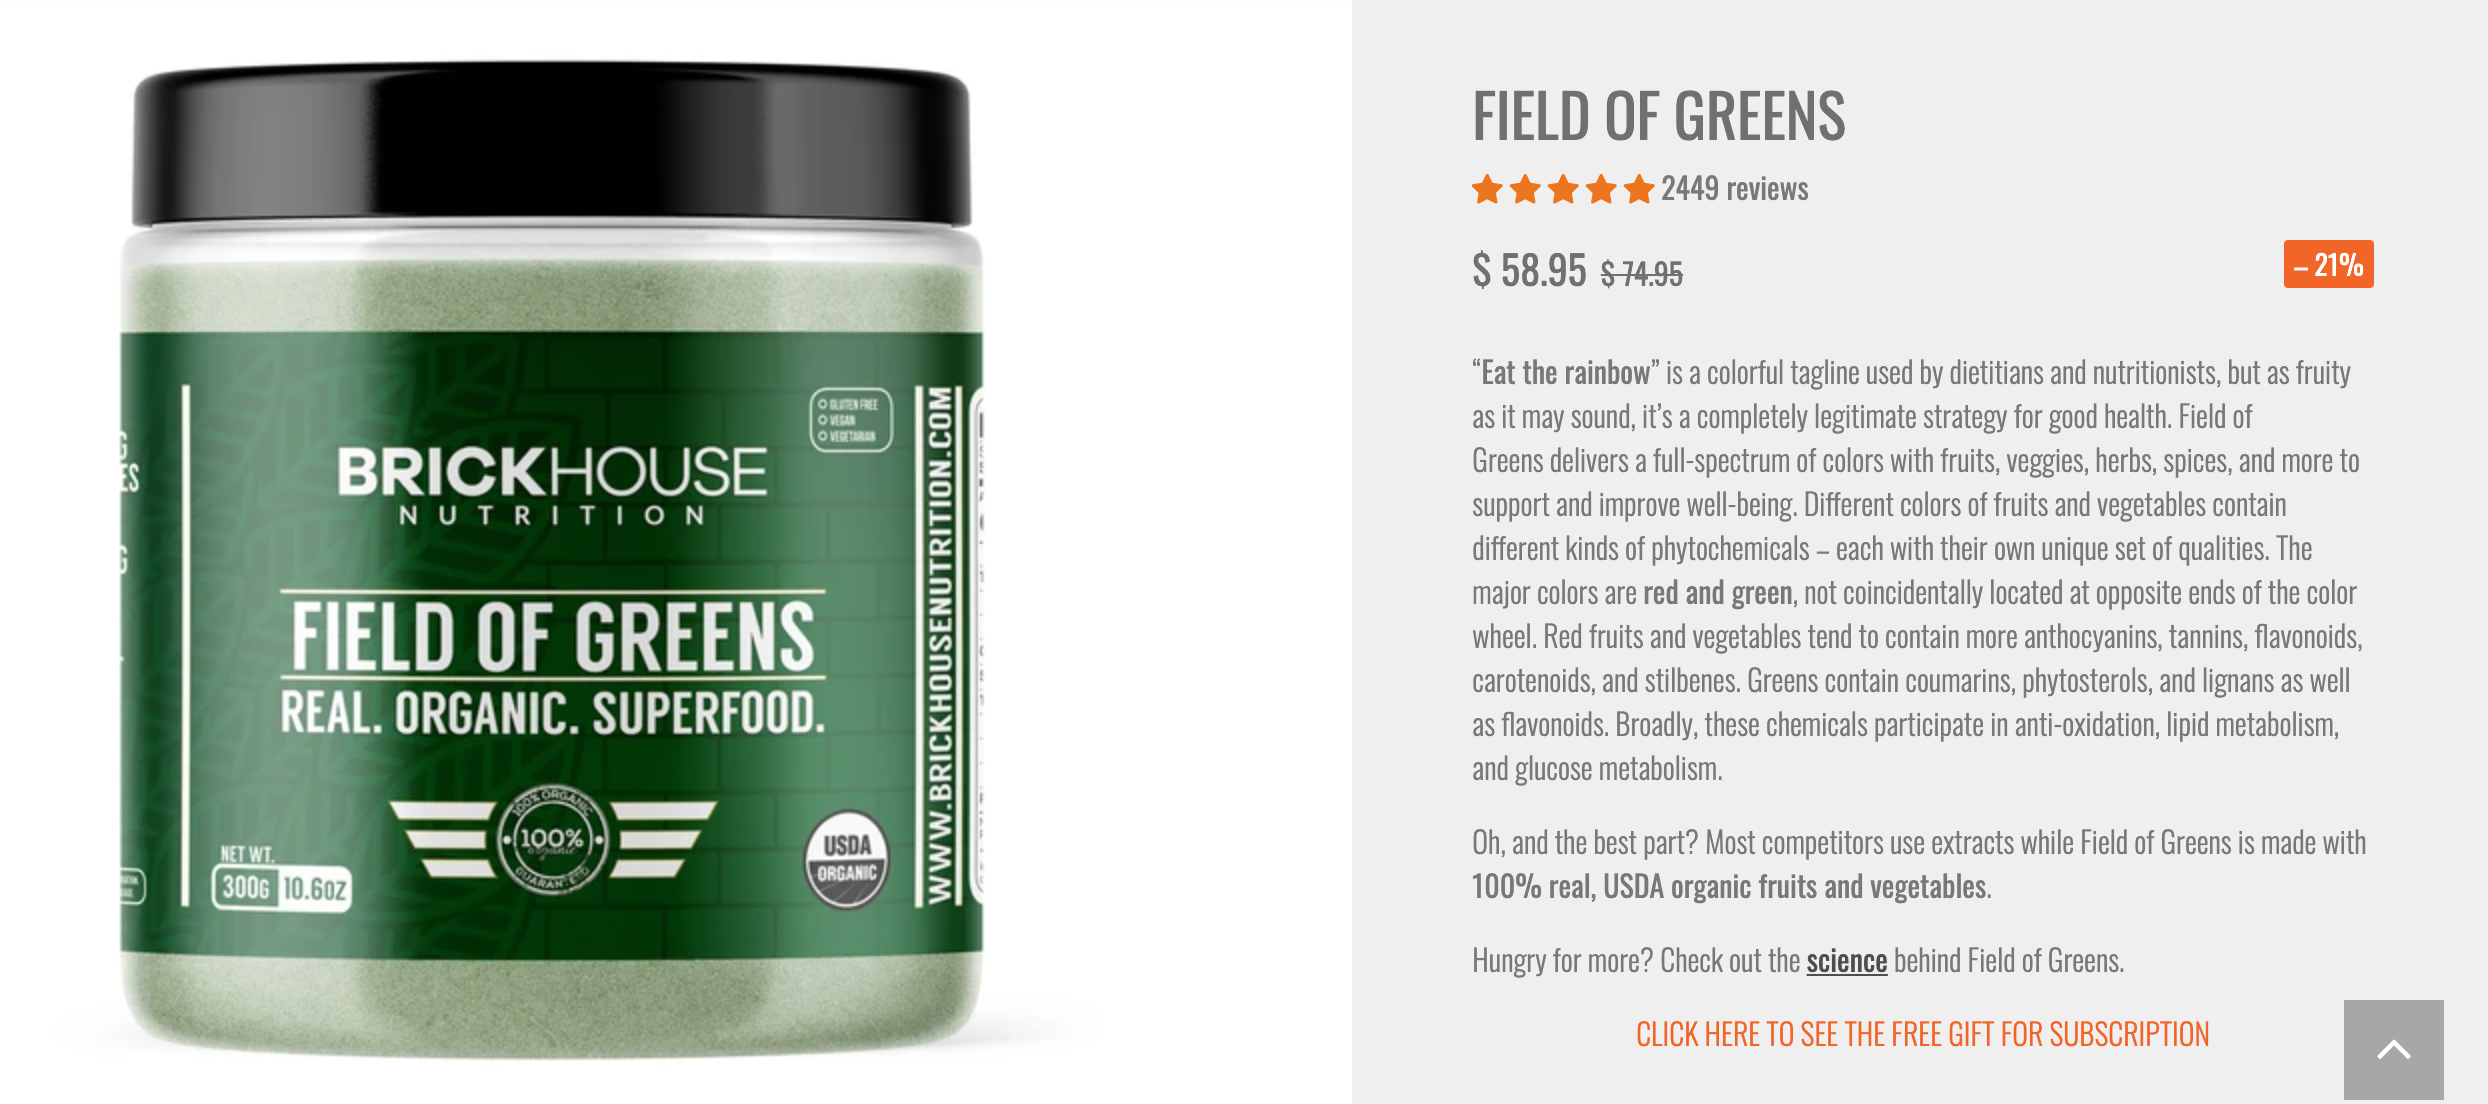 Product image of "field of greens" with product description and price